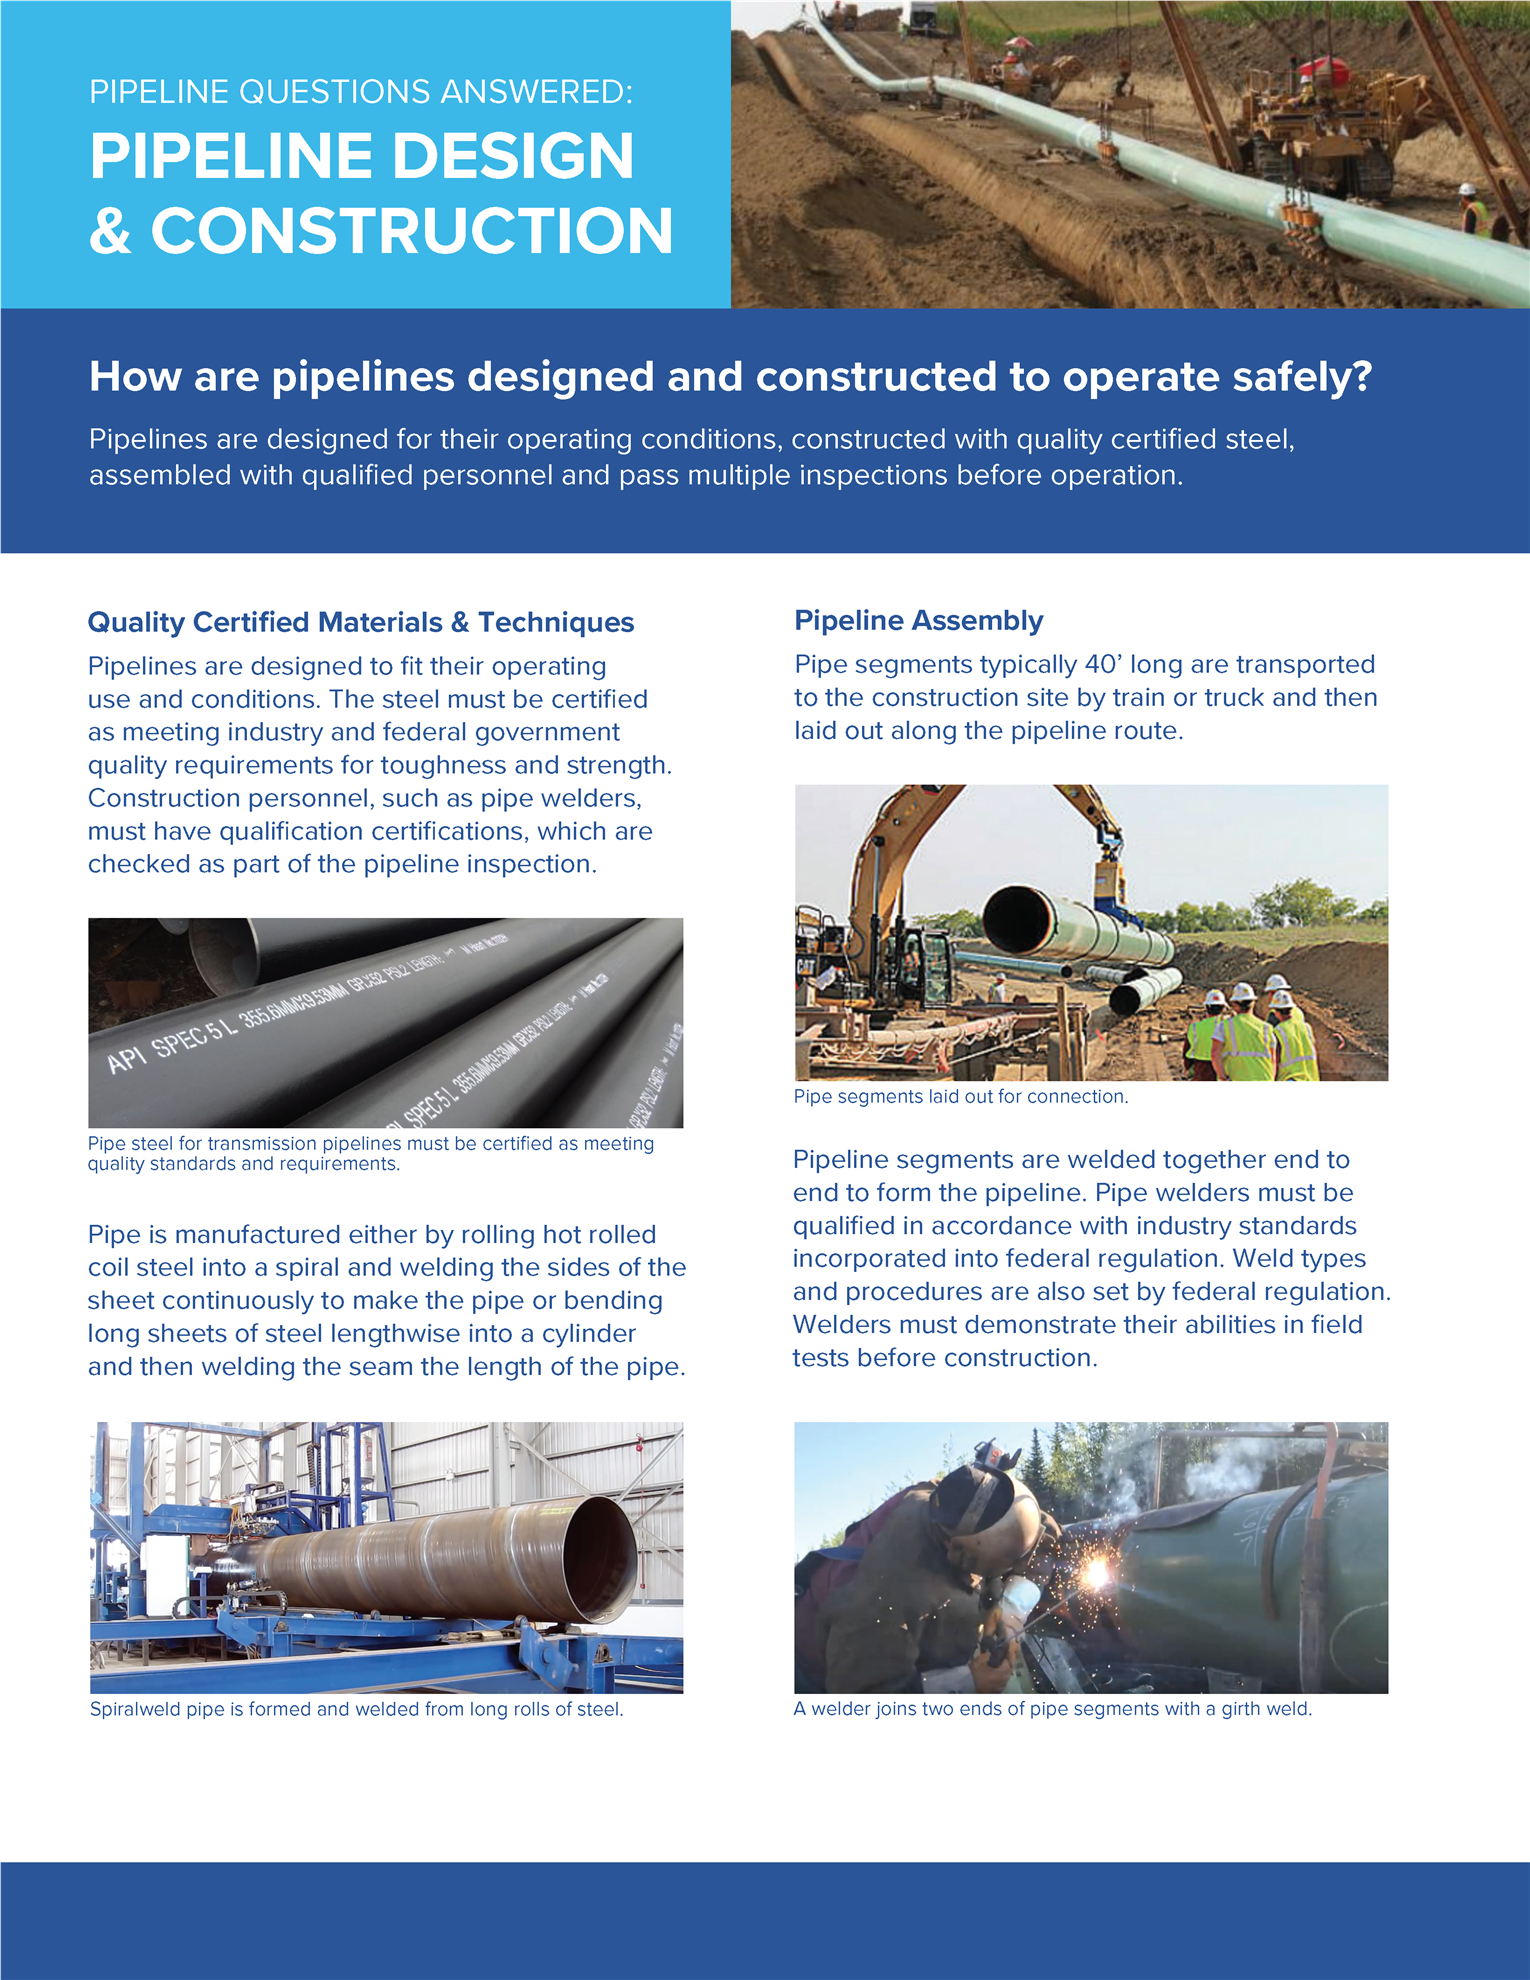 Pipeline Construction and Design